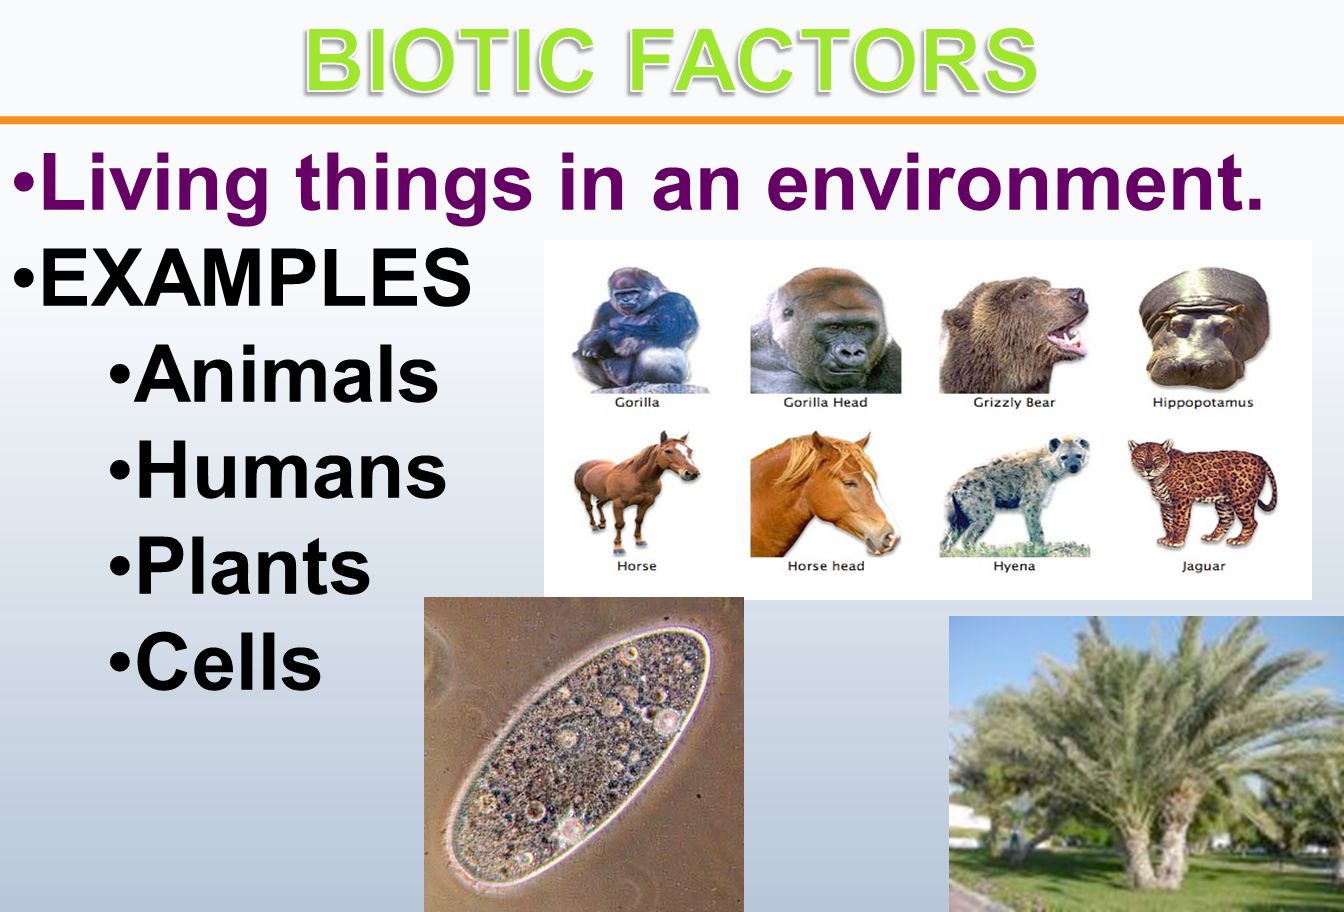 Living things in an environment. EXAMPLES Animals Humans Plants Cells